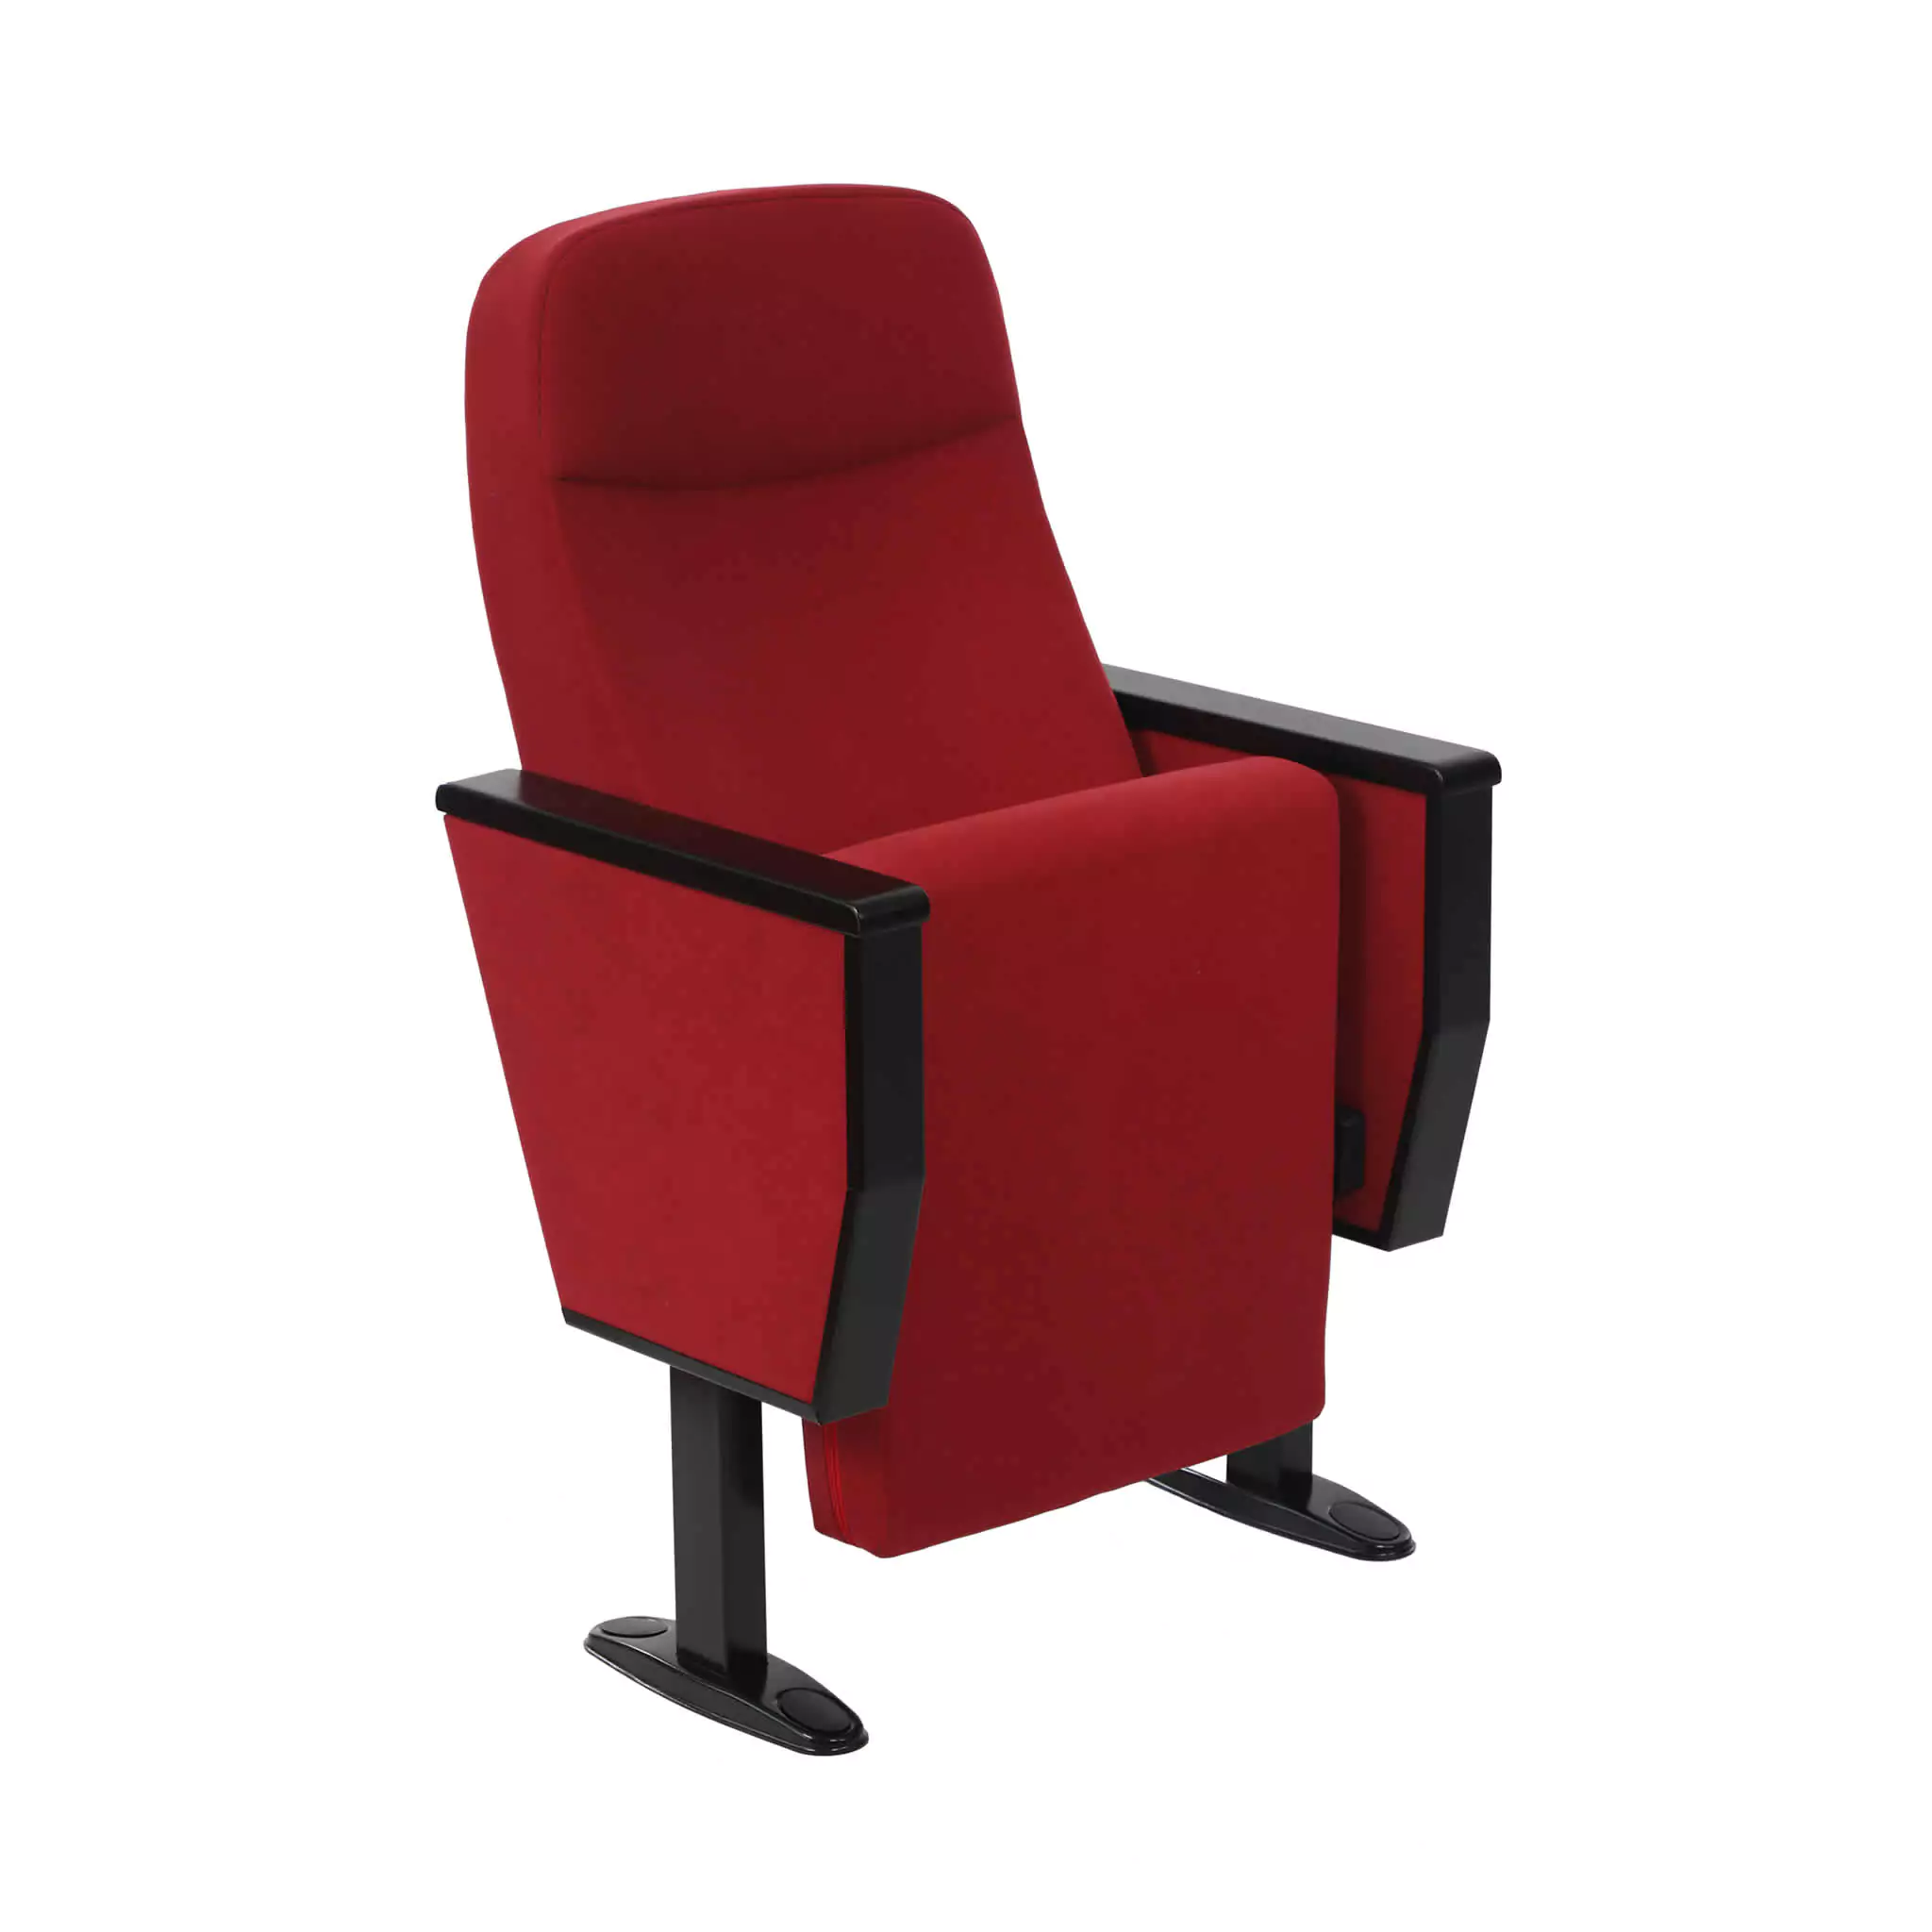 Simko Seating Product Conference Seat Suare 02